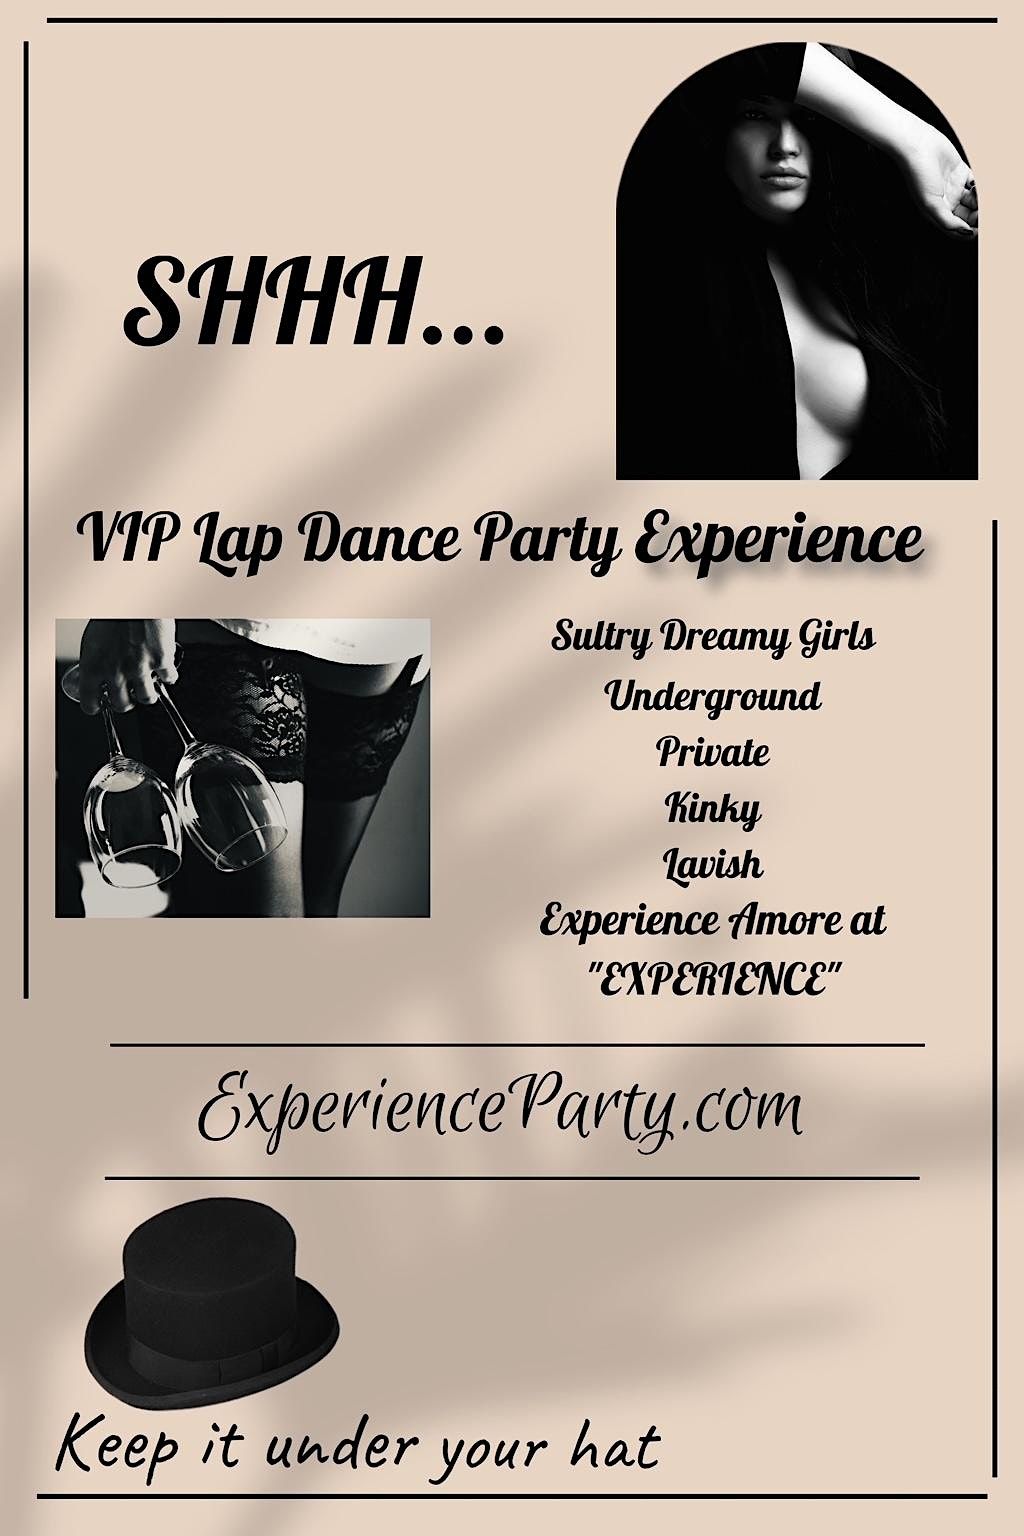 Underground Private Gentlemens Club And Private Lap Dance Fetish Party Temptations New York 3